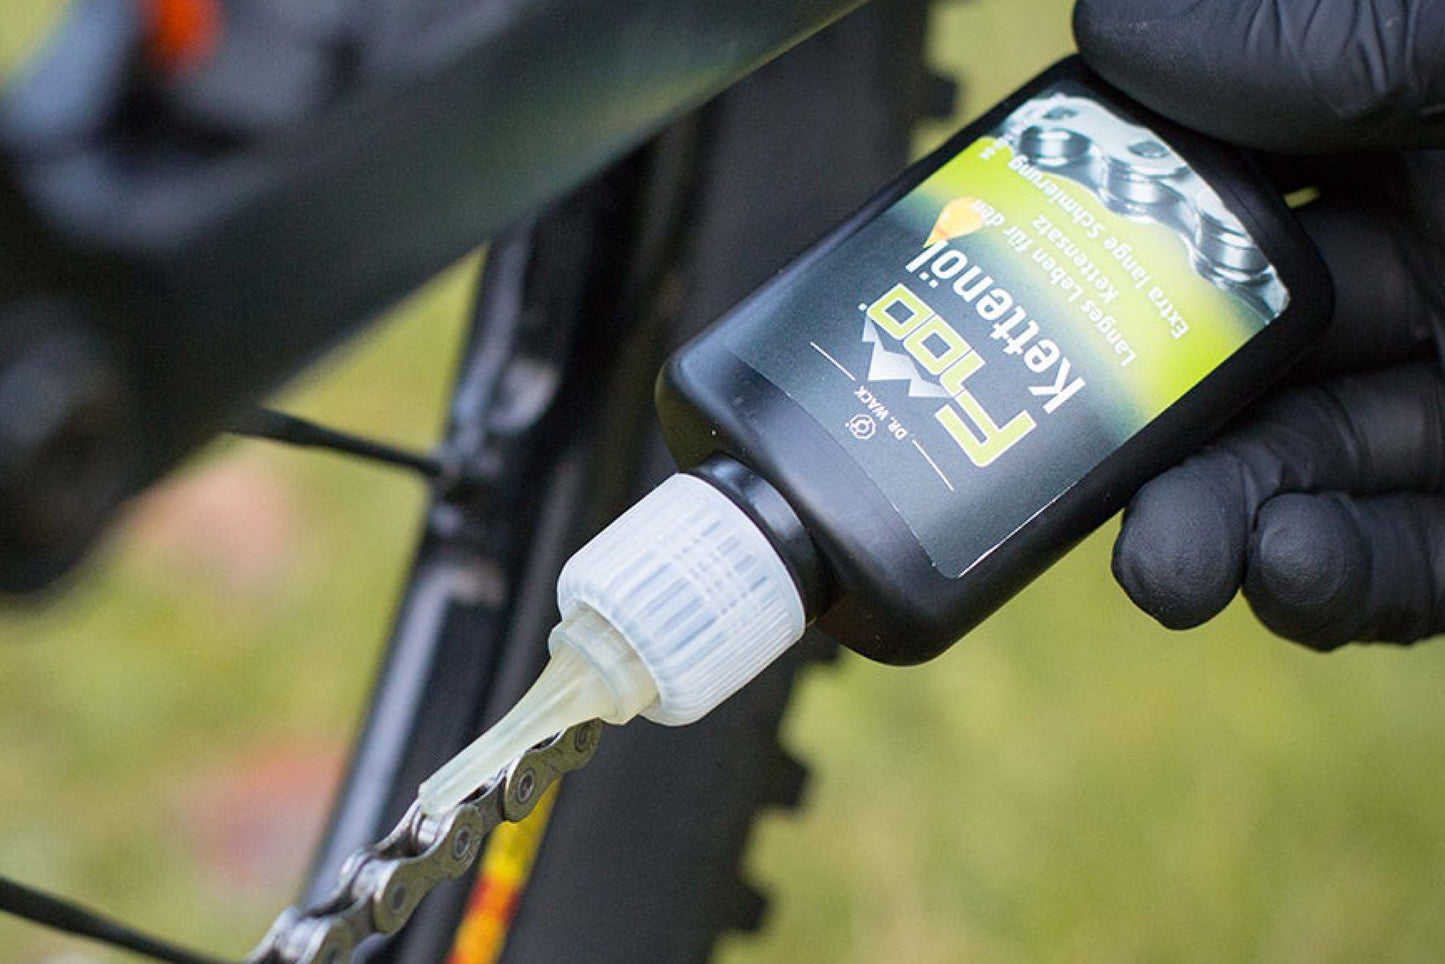 DR WACK - F100 Bicycle Chain Oil - FISHTAIL CYCLERY